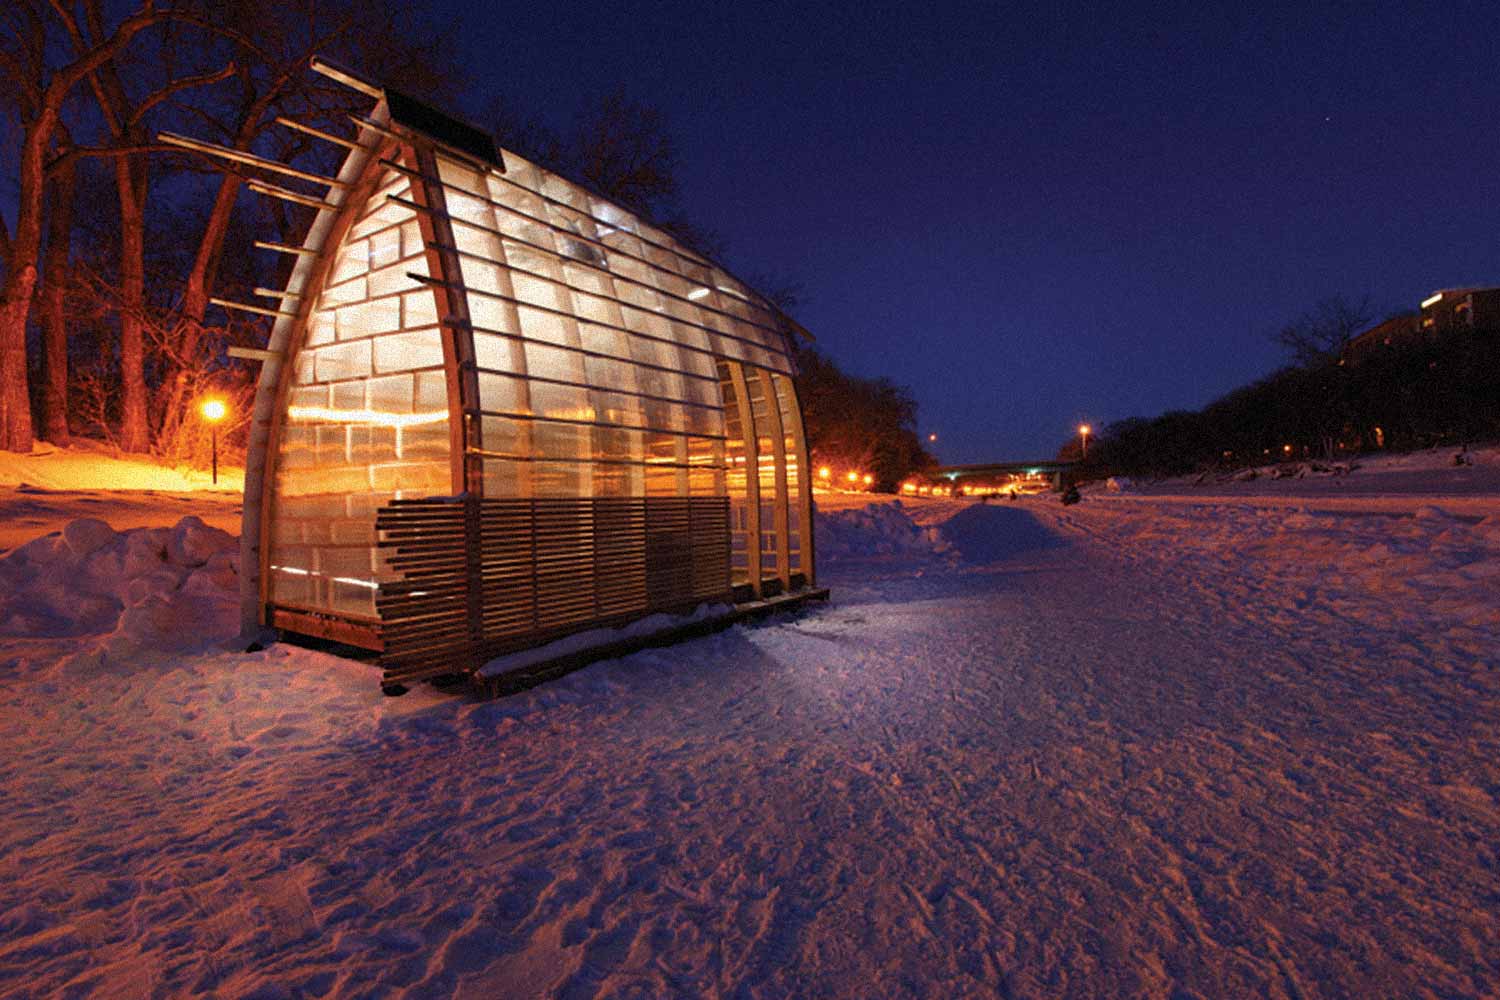 A hut with wooden frame, polycarbonate and aluminum panels, is lit up from the inside on the dark river trail.